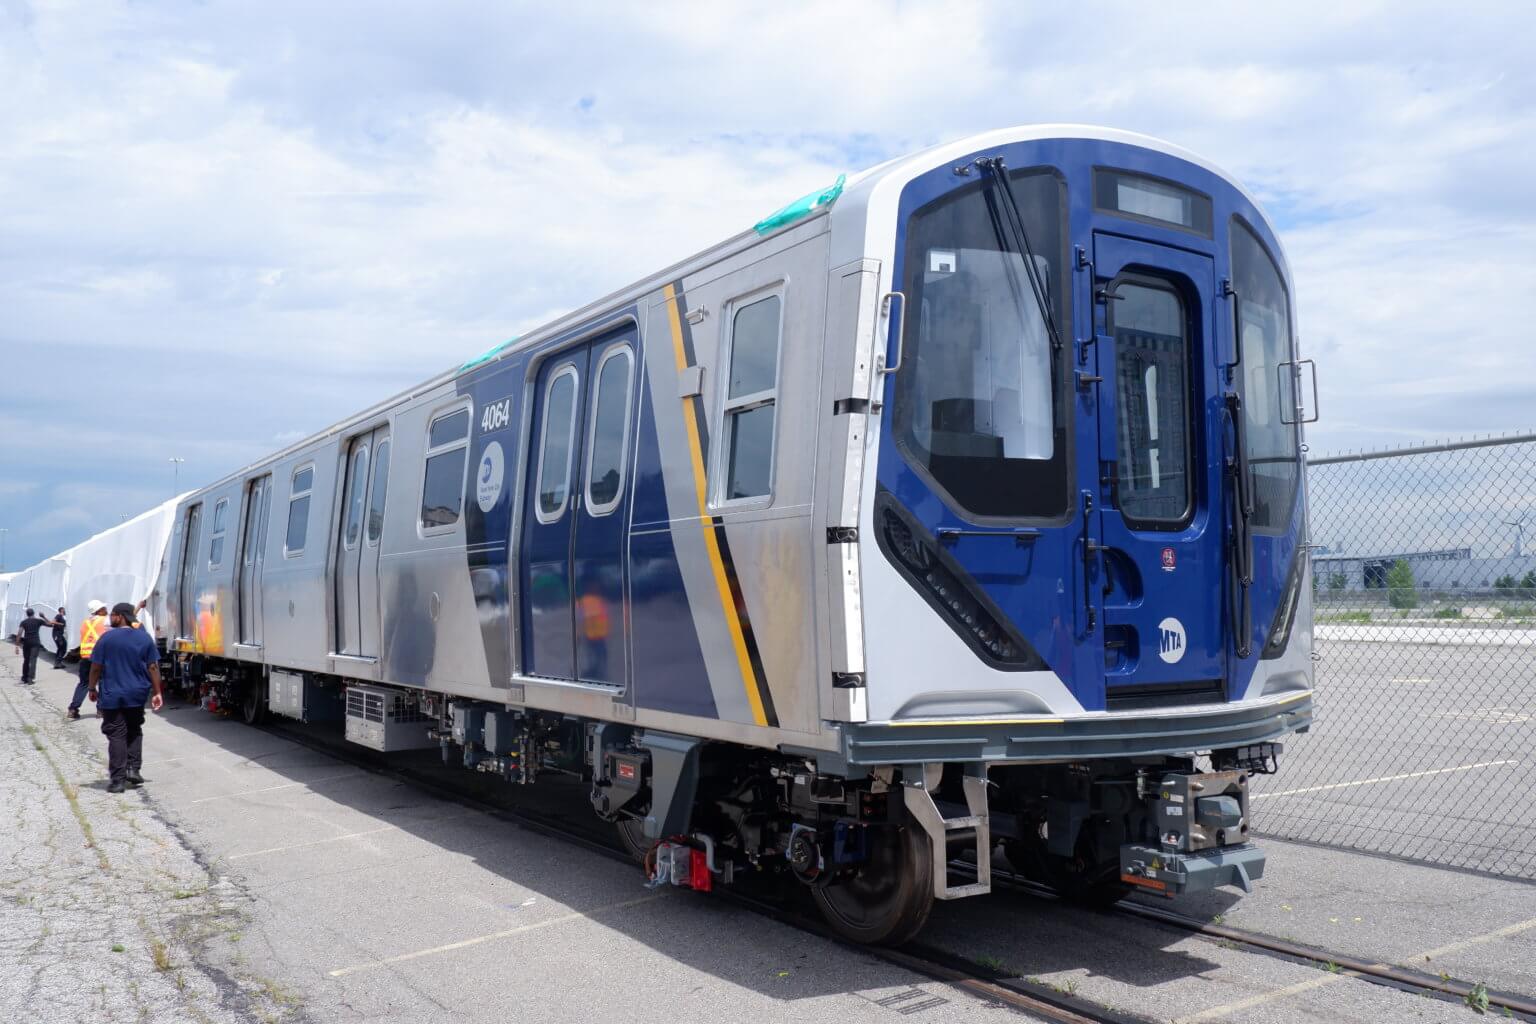 MTA moves forward with new R211 train cars after yearlong delay